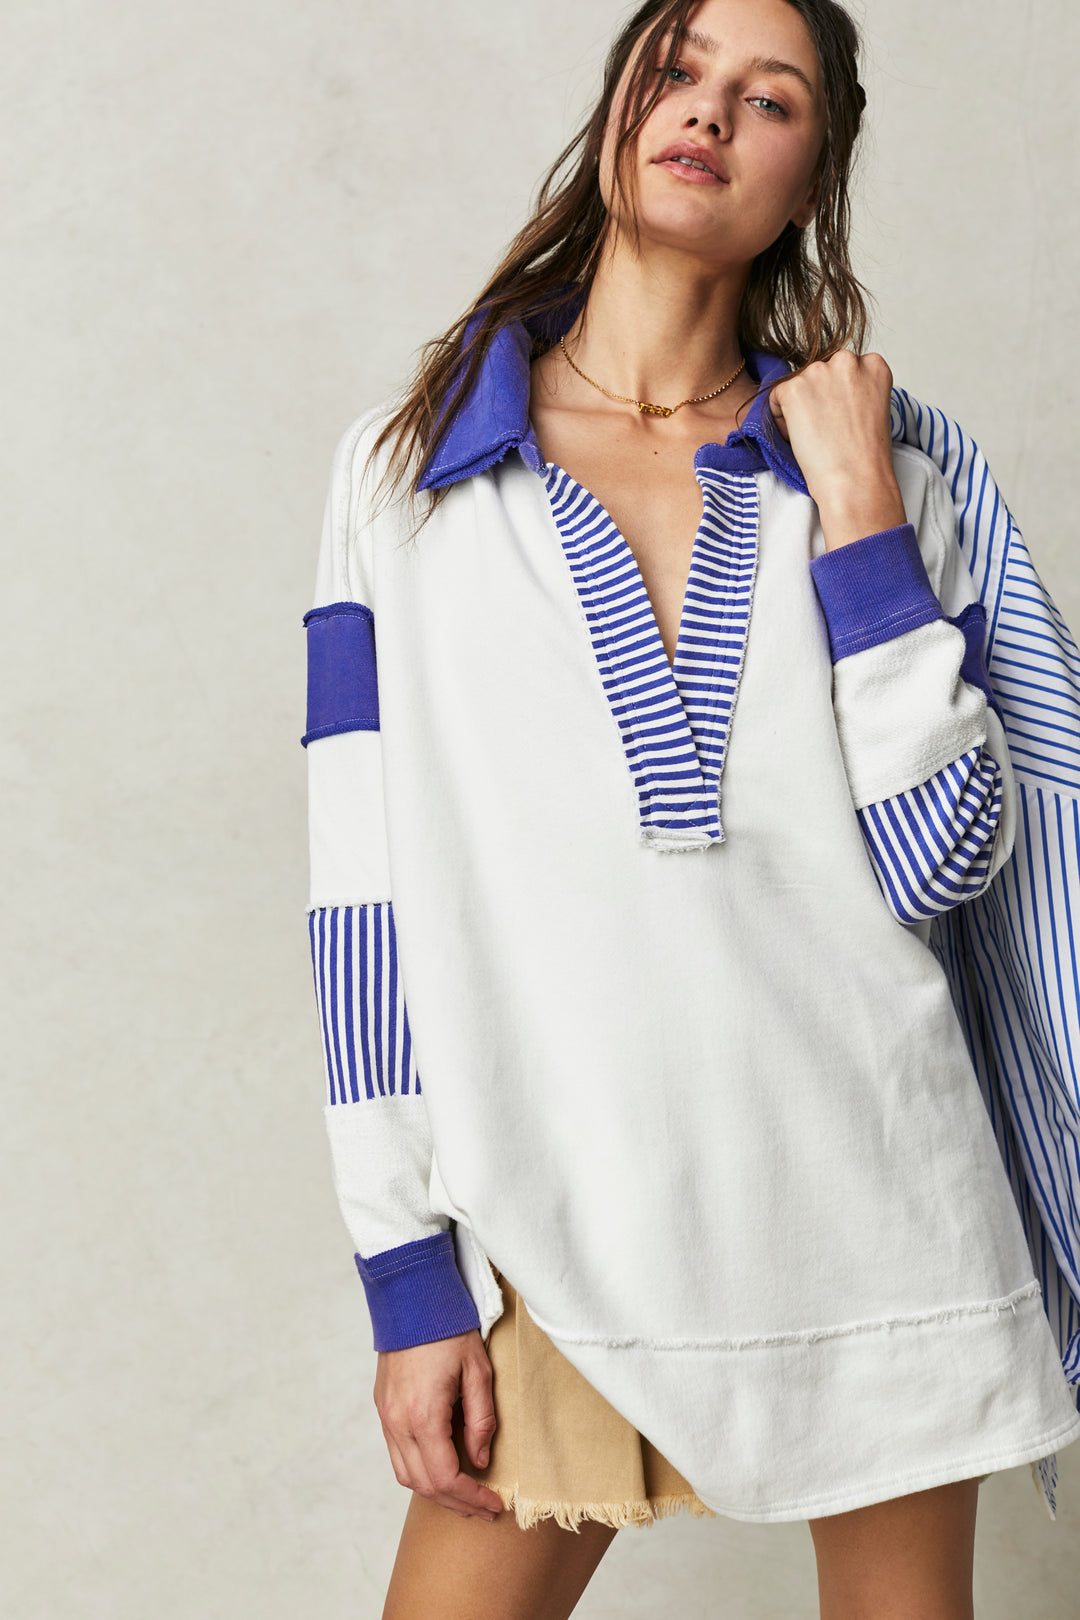 This Free People Clean Prep Polo Top will have you feeling like a ten outta ten. With its oversized fit, long sleeves, and open V-neckline, this top has the perfect combination of comfy and chic. Now it's just up to you to bring that winning style